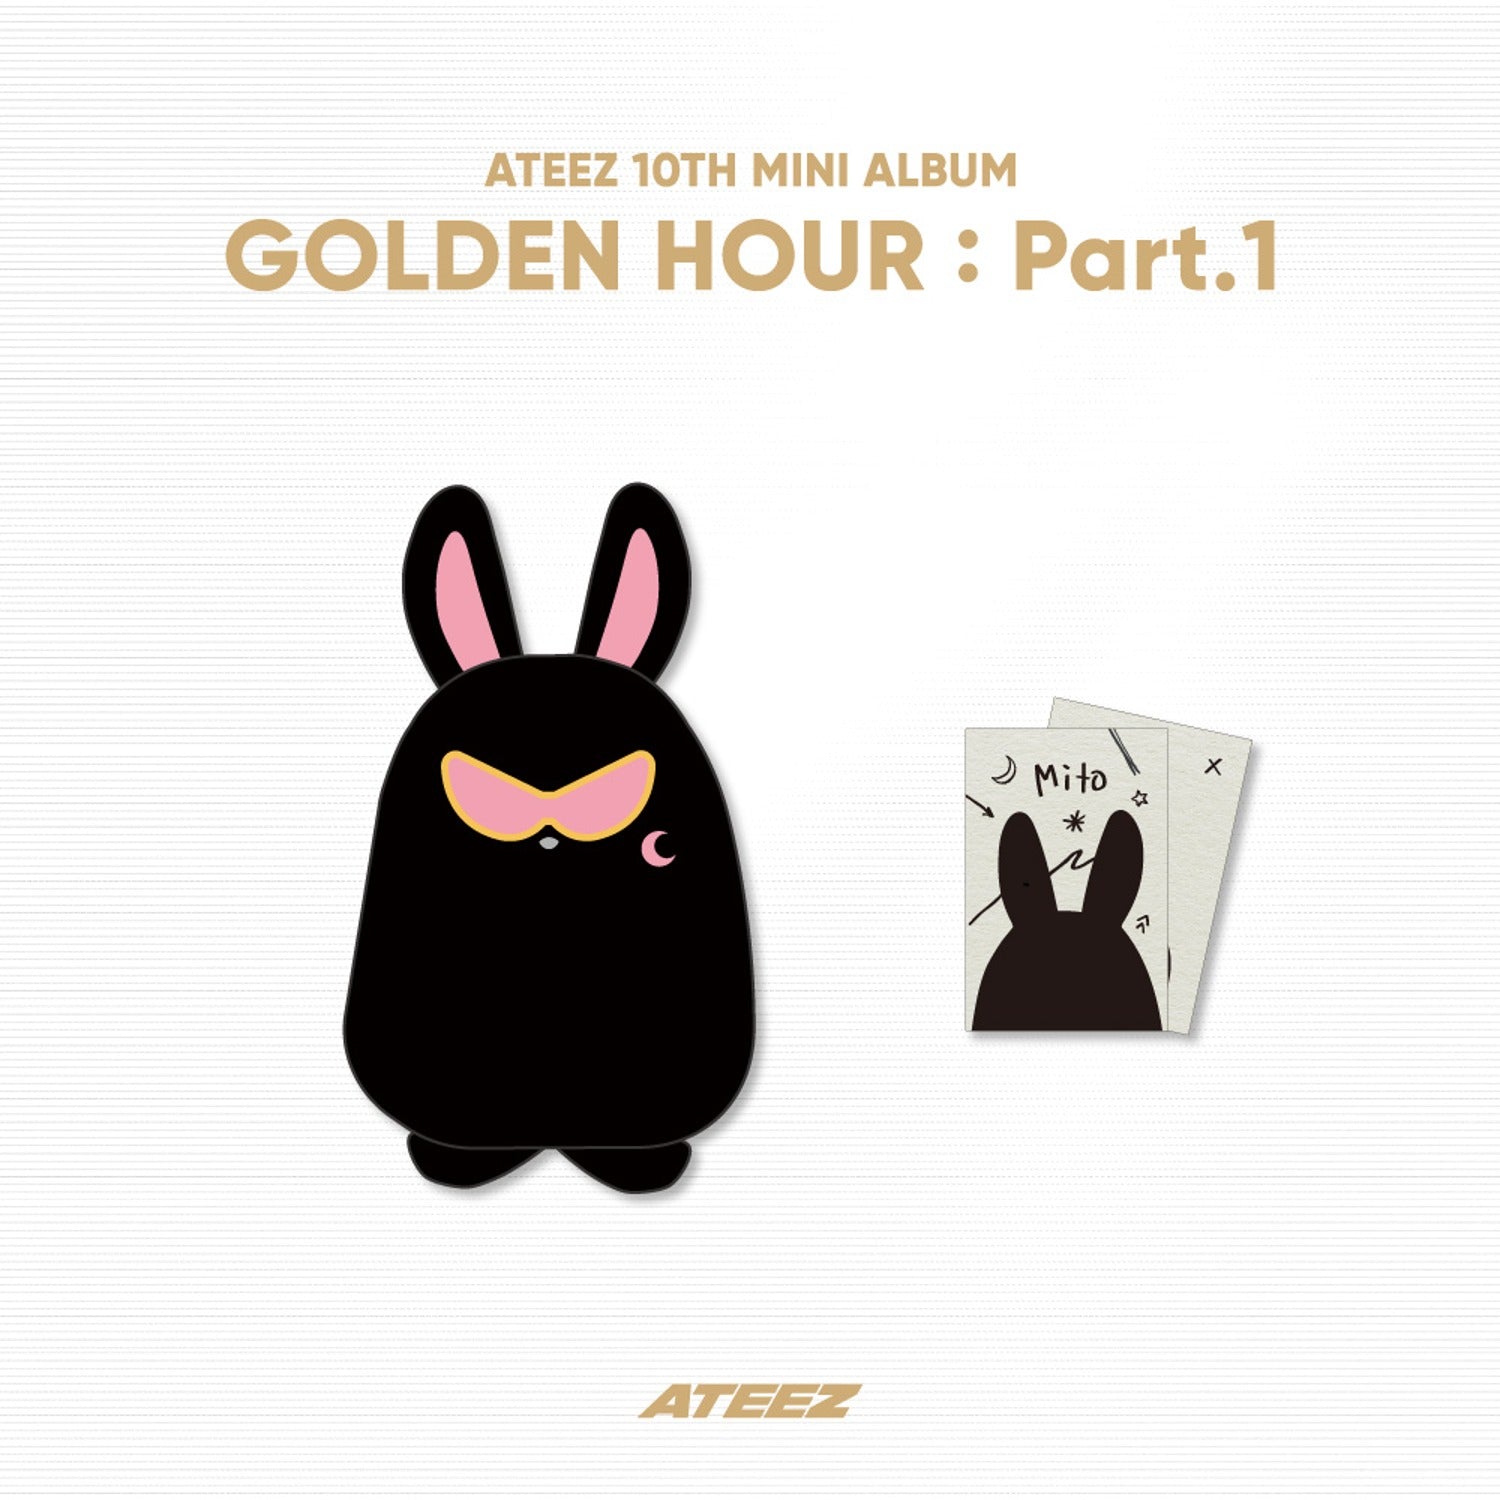 ATEEZ - GOLDEN HOUR : PART.1 OFFICIAL MD MITO STRESS BALL - COKODIVE